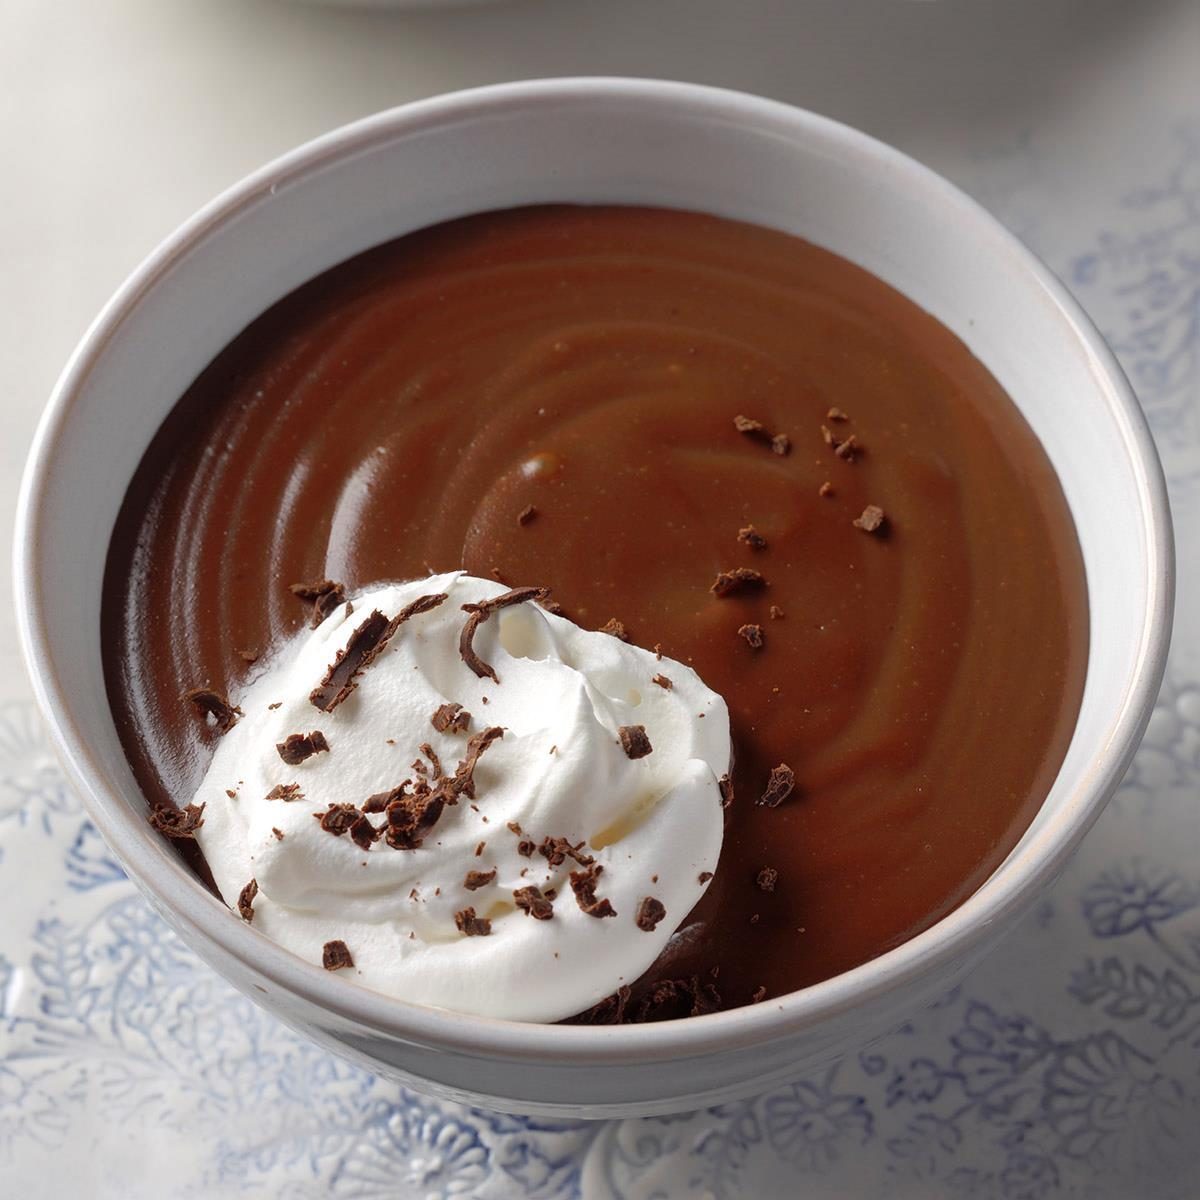 https://www.tasteofhome.com/wp-content/uploads/2018/05/Old-Fashioned-Chocolate-Pudding_EXPS_TCBBZ18_2626_B05_04_6b.jpg